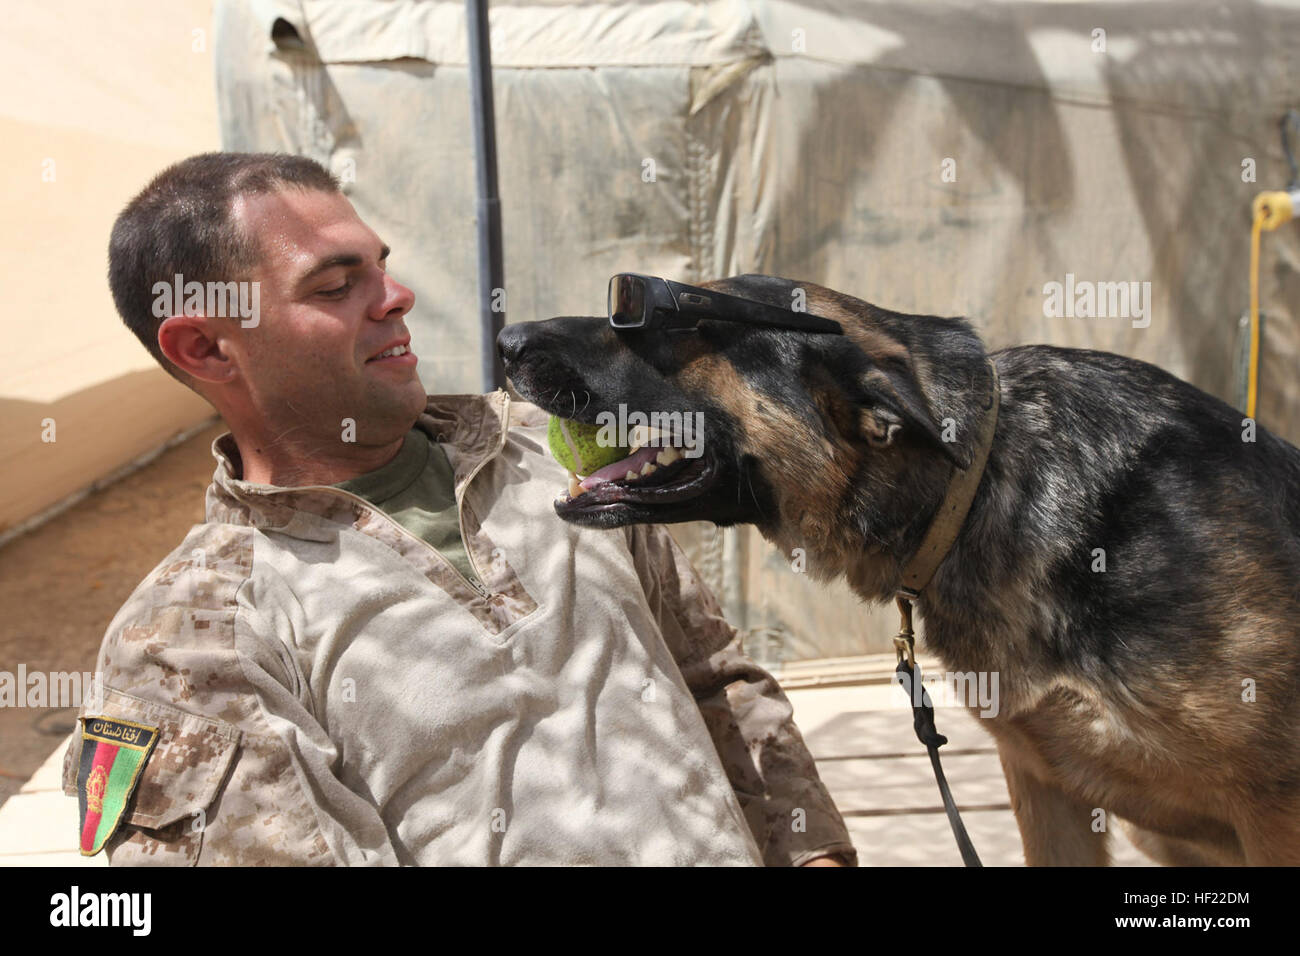 Lance Cpl. Jeremy D. Angenend, combat tracker handler, Military Police, III Marine Expeditionary Force, out of Okinawa, Japan, and his dog Fito play around at Camp Leatherneck, Afghanistan. Angenend and Fito have been partnered for two years. Angenend says that he and Fito have the same kind of goofy, outgoing personalities and they have fun together. “He never has a bad day,” says Angenend, “I want no other dog.” USMC-100504-M-3079S-017 Stock Photo